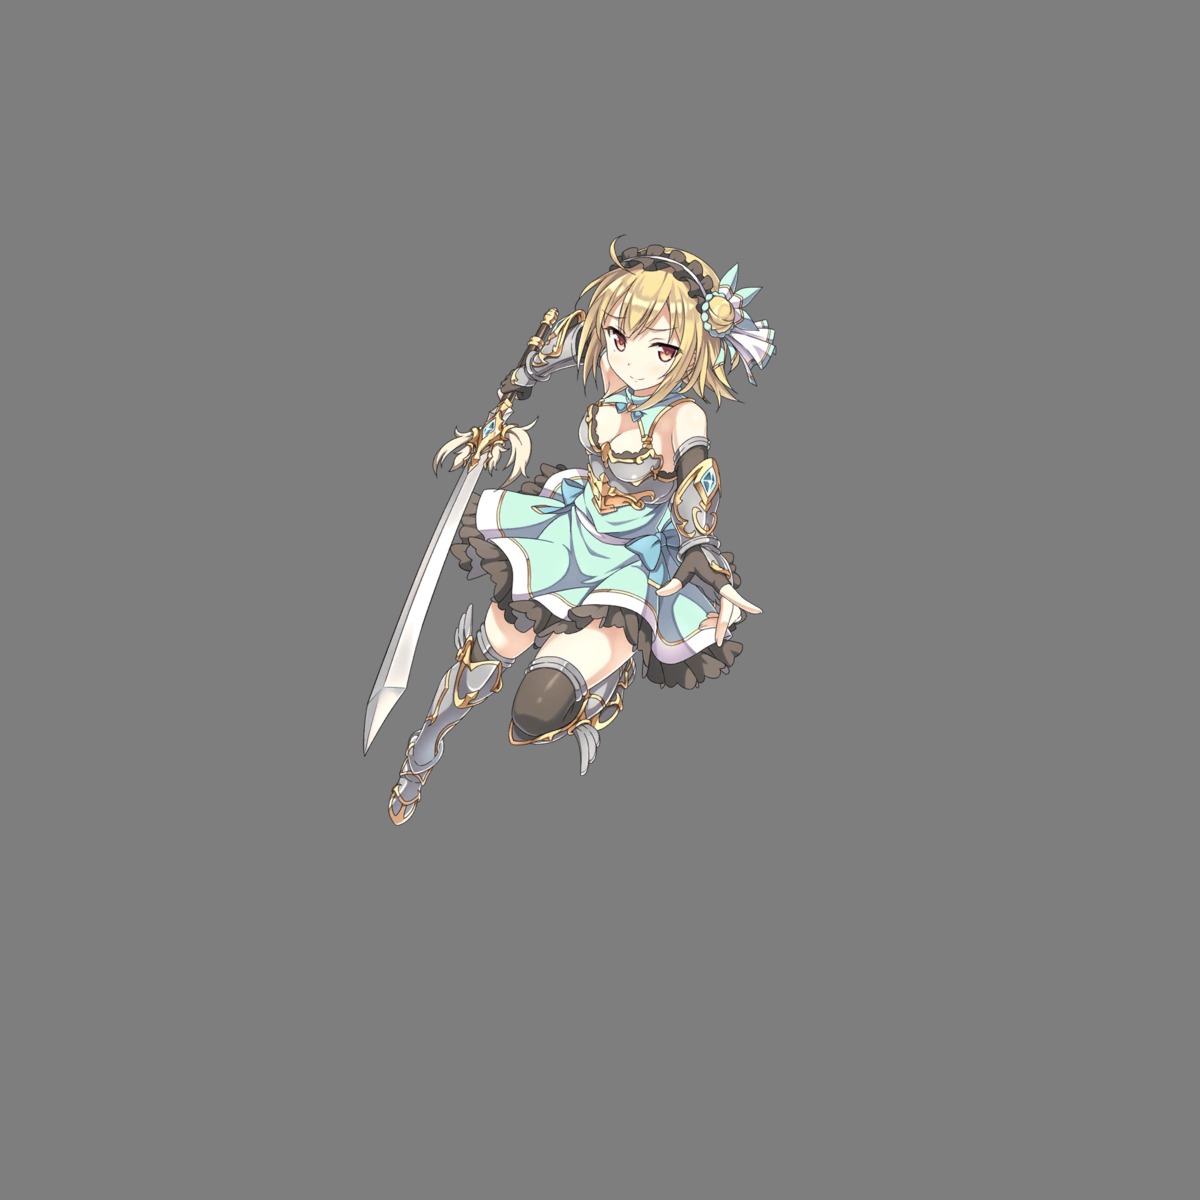 armor cleavage hoshi_no_girls_odyssey sword thighhighs transparent_png